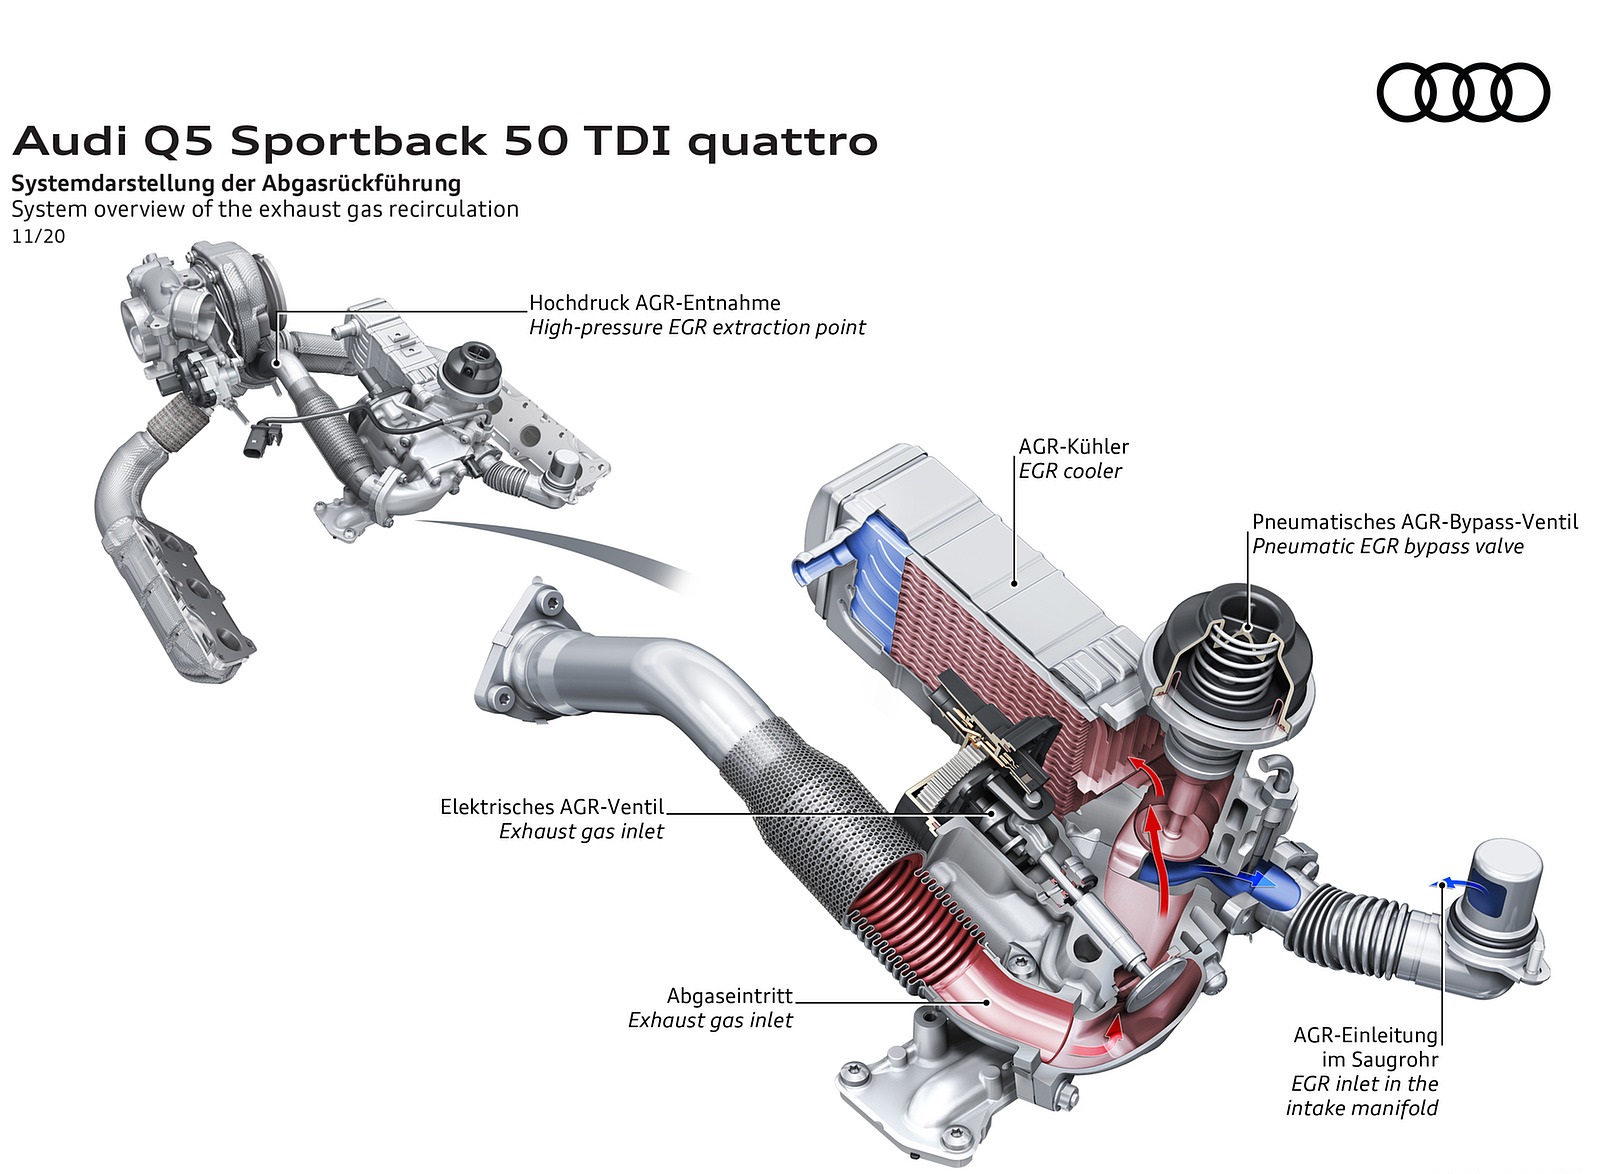 2021 Audi Q5 Sportback System overview of the exhaust gas recirculation Wallpapers #115 of 158